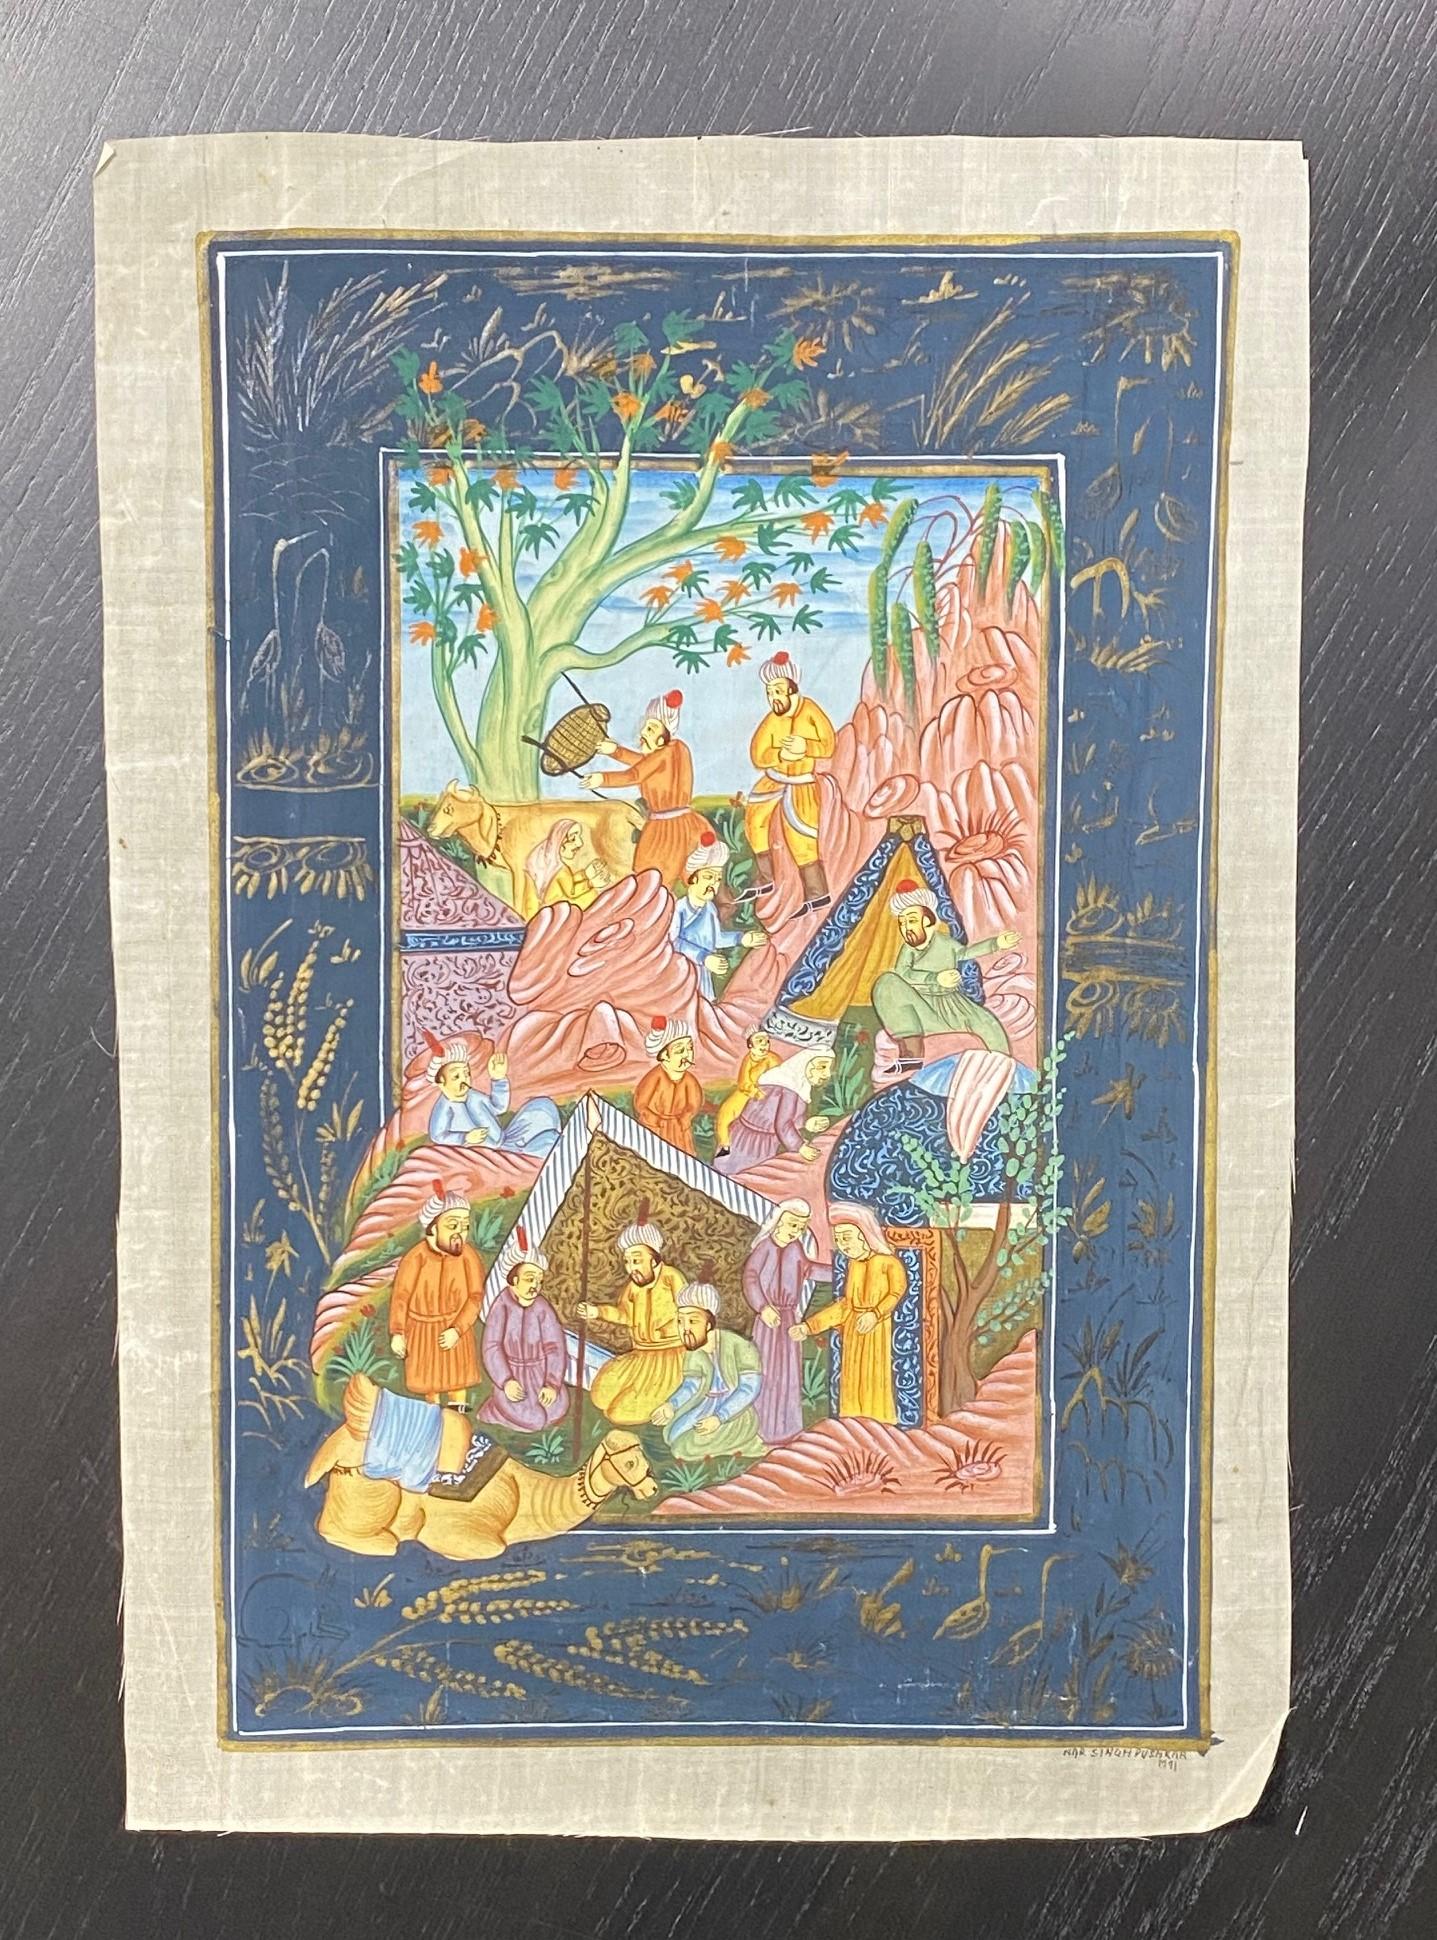 A beautiful, intricately detailed, and boldly colored South Indian miniature painting of village life in Rajasthan, India.  These paintings are also known as Rajput paintings and/or Rajasthani paintings.   This style evolved and flourished in the